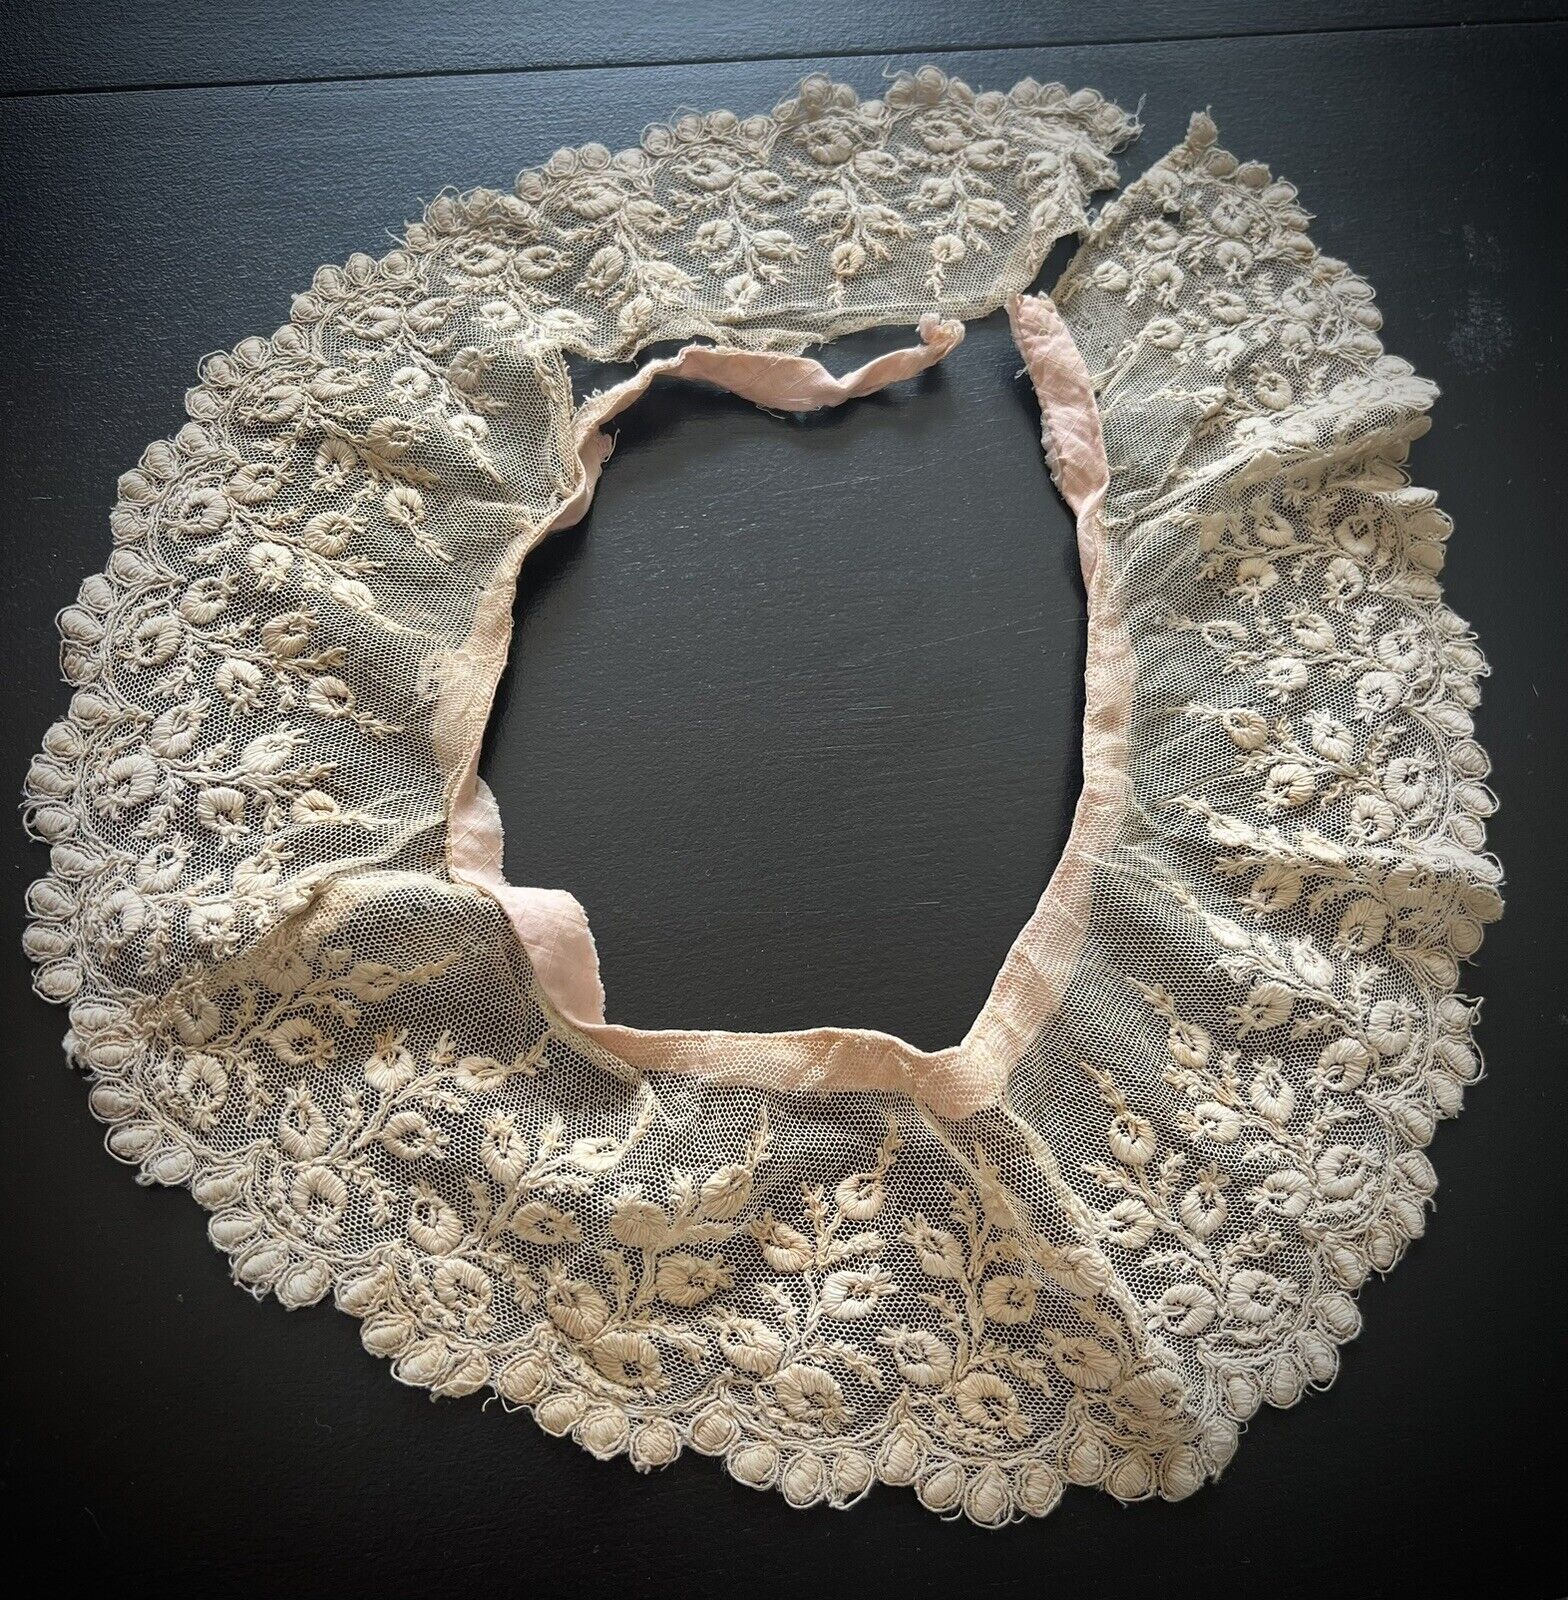 Antique Lace Collar 1800s Embroidery on Tulle Net Needle